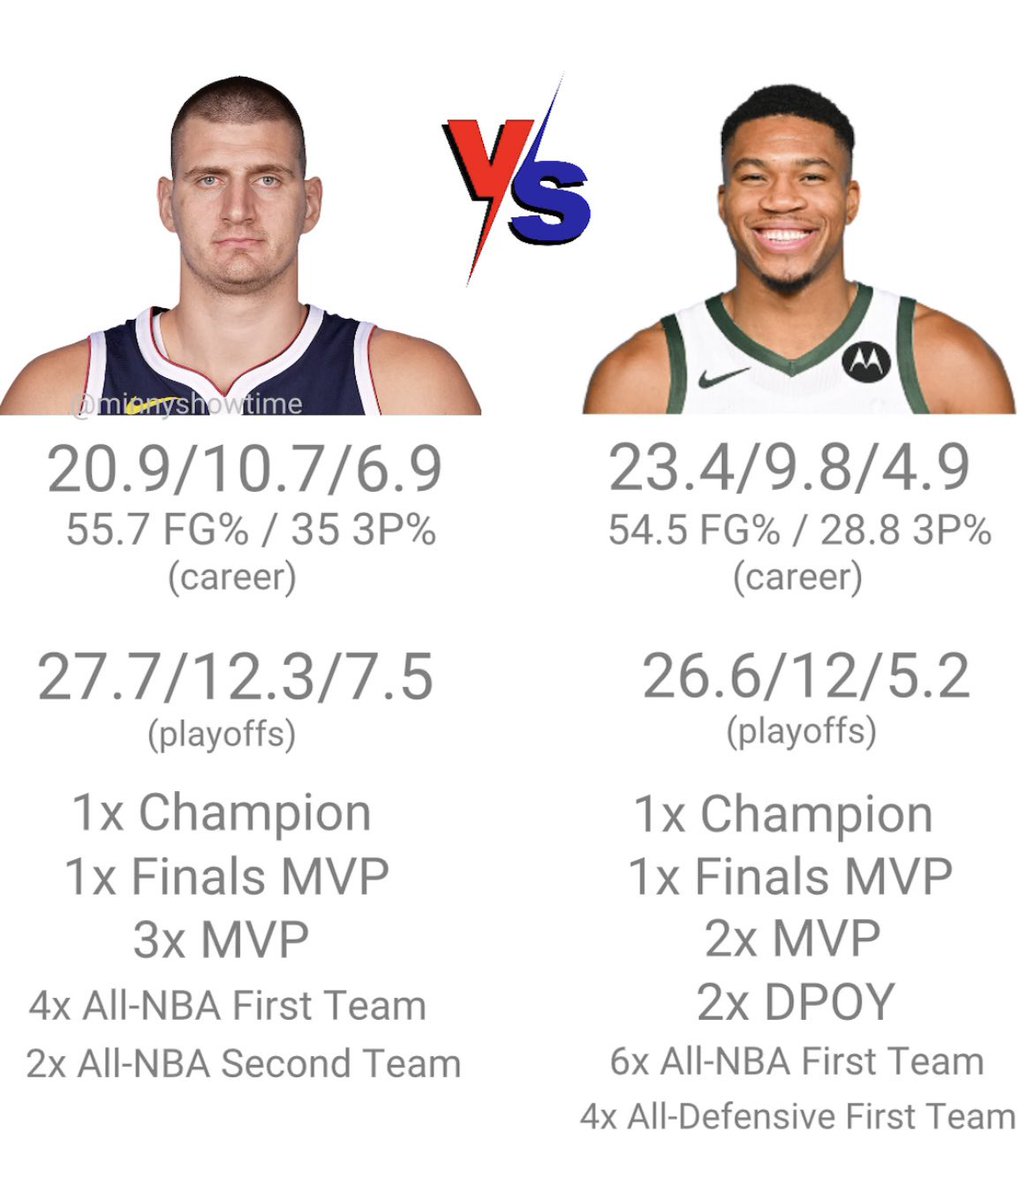 Who would you pick to start a franchise with, Jokic or Giannis?